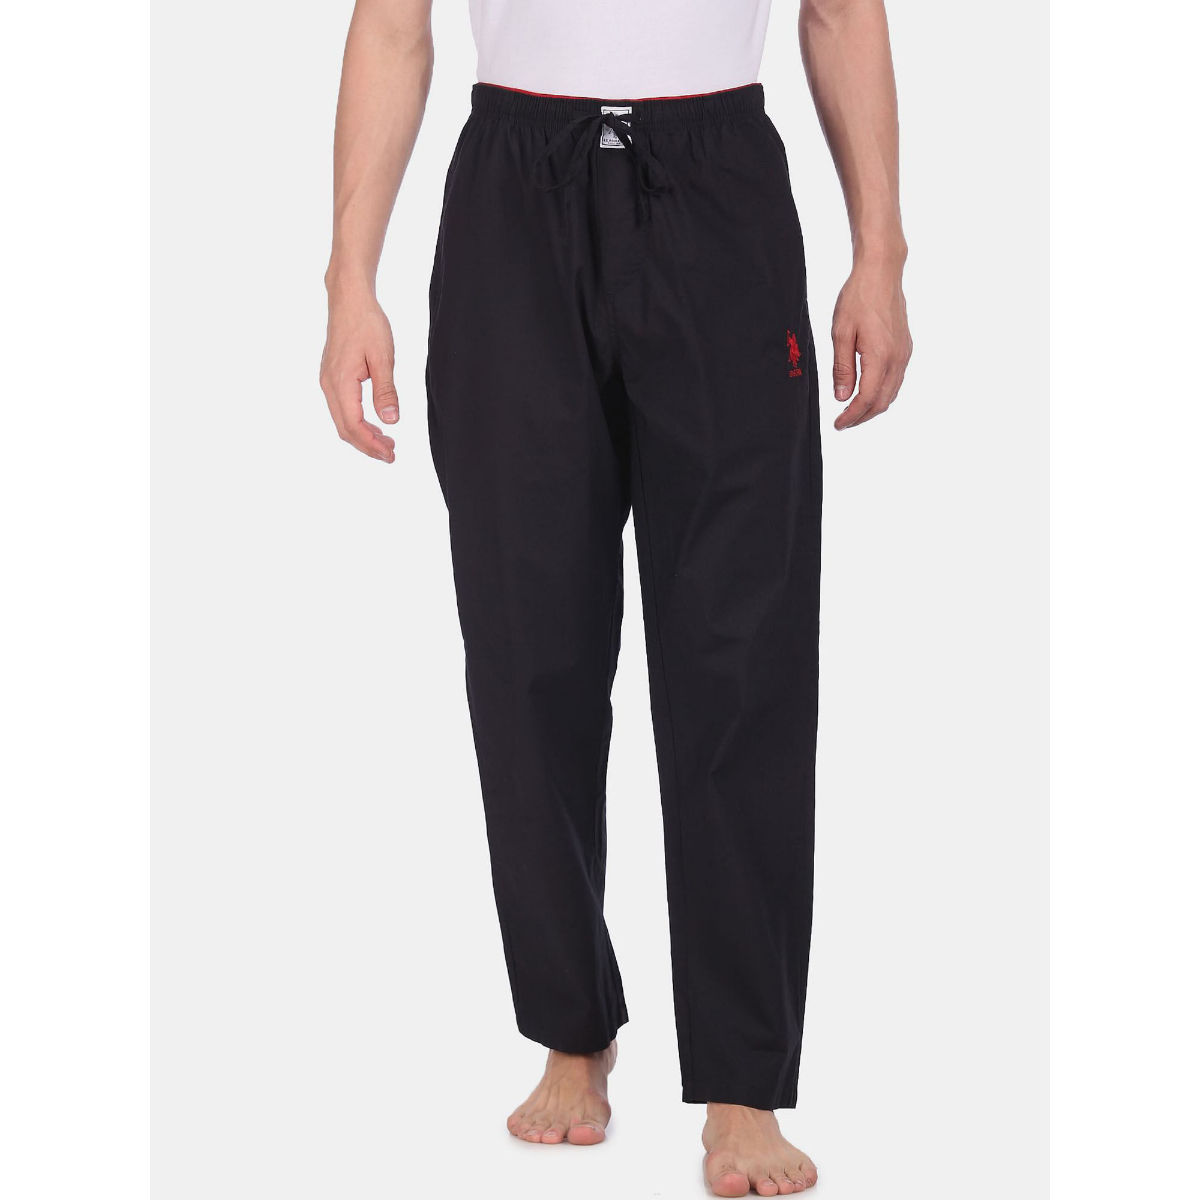 Buy U.S. POLO ASSN. Grey Printed Cotton Stretch Slim Fit Mens Trousers |  Shoppers Stop